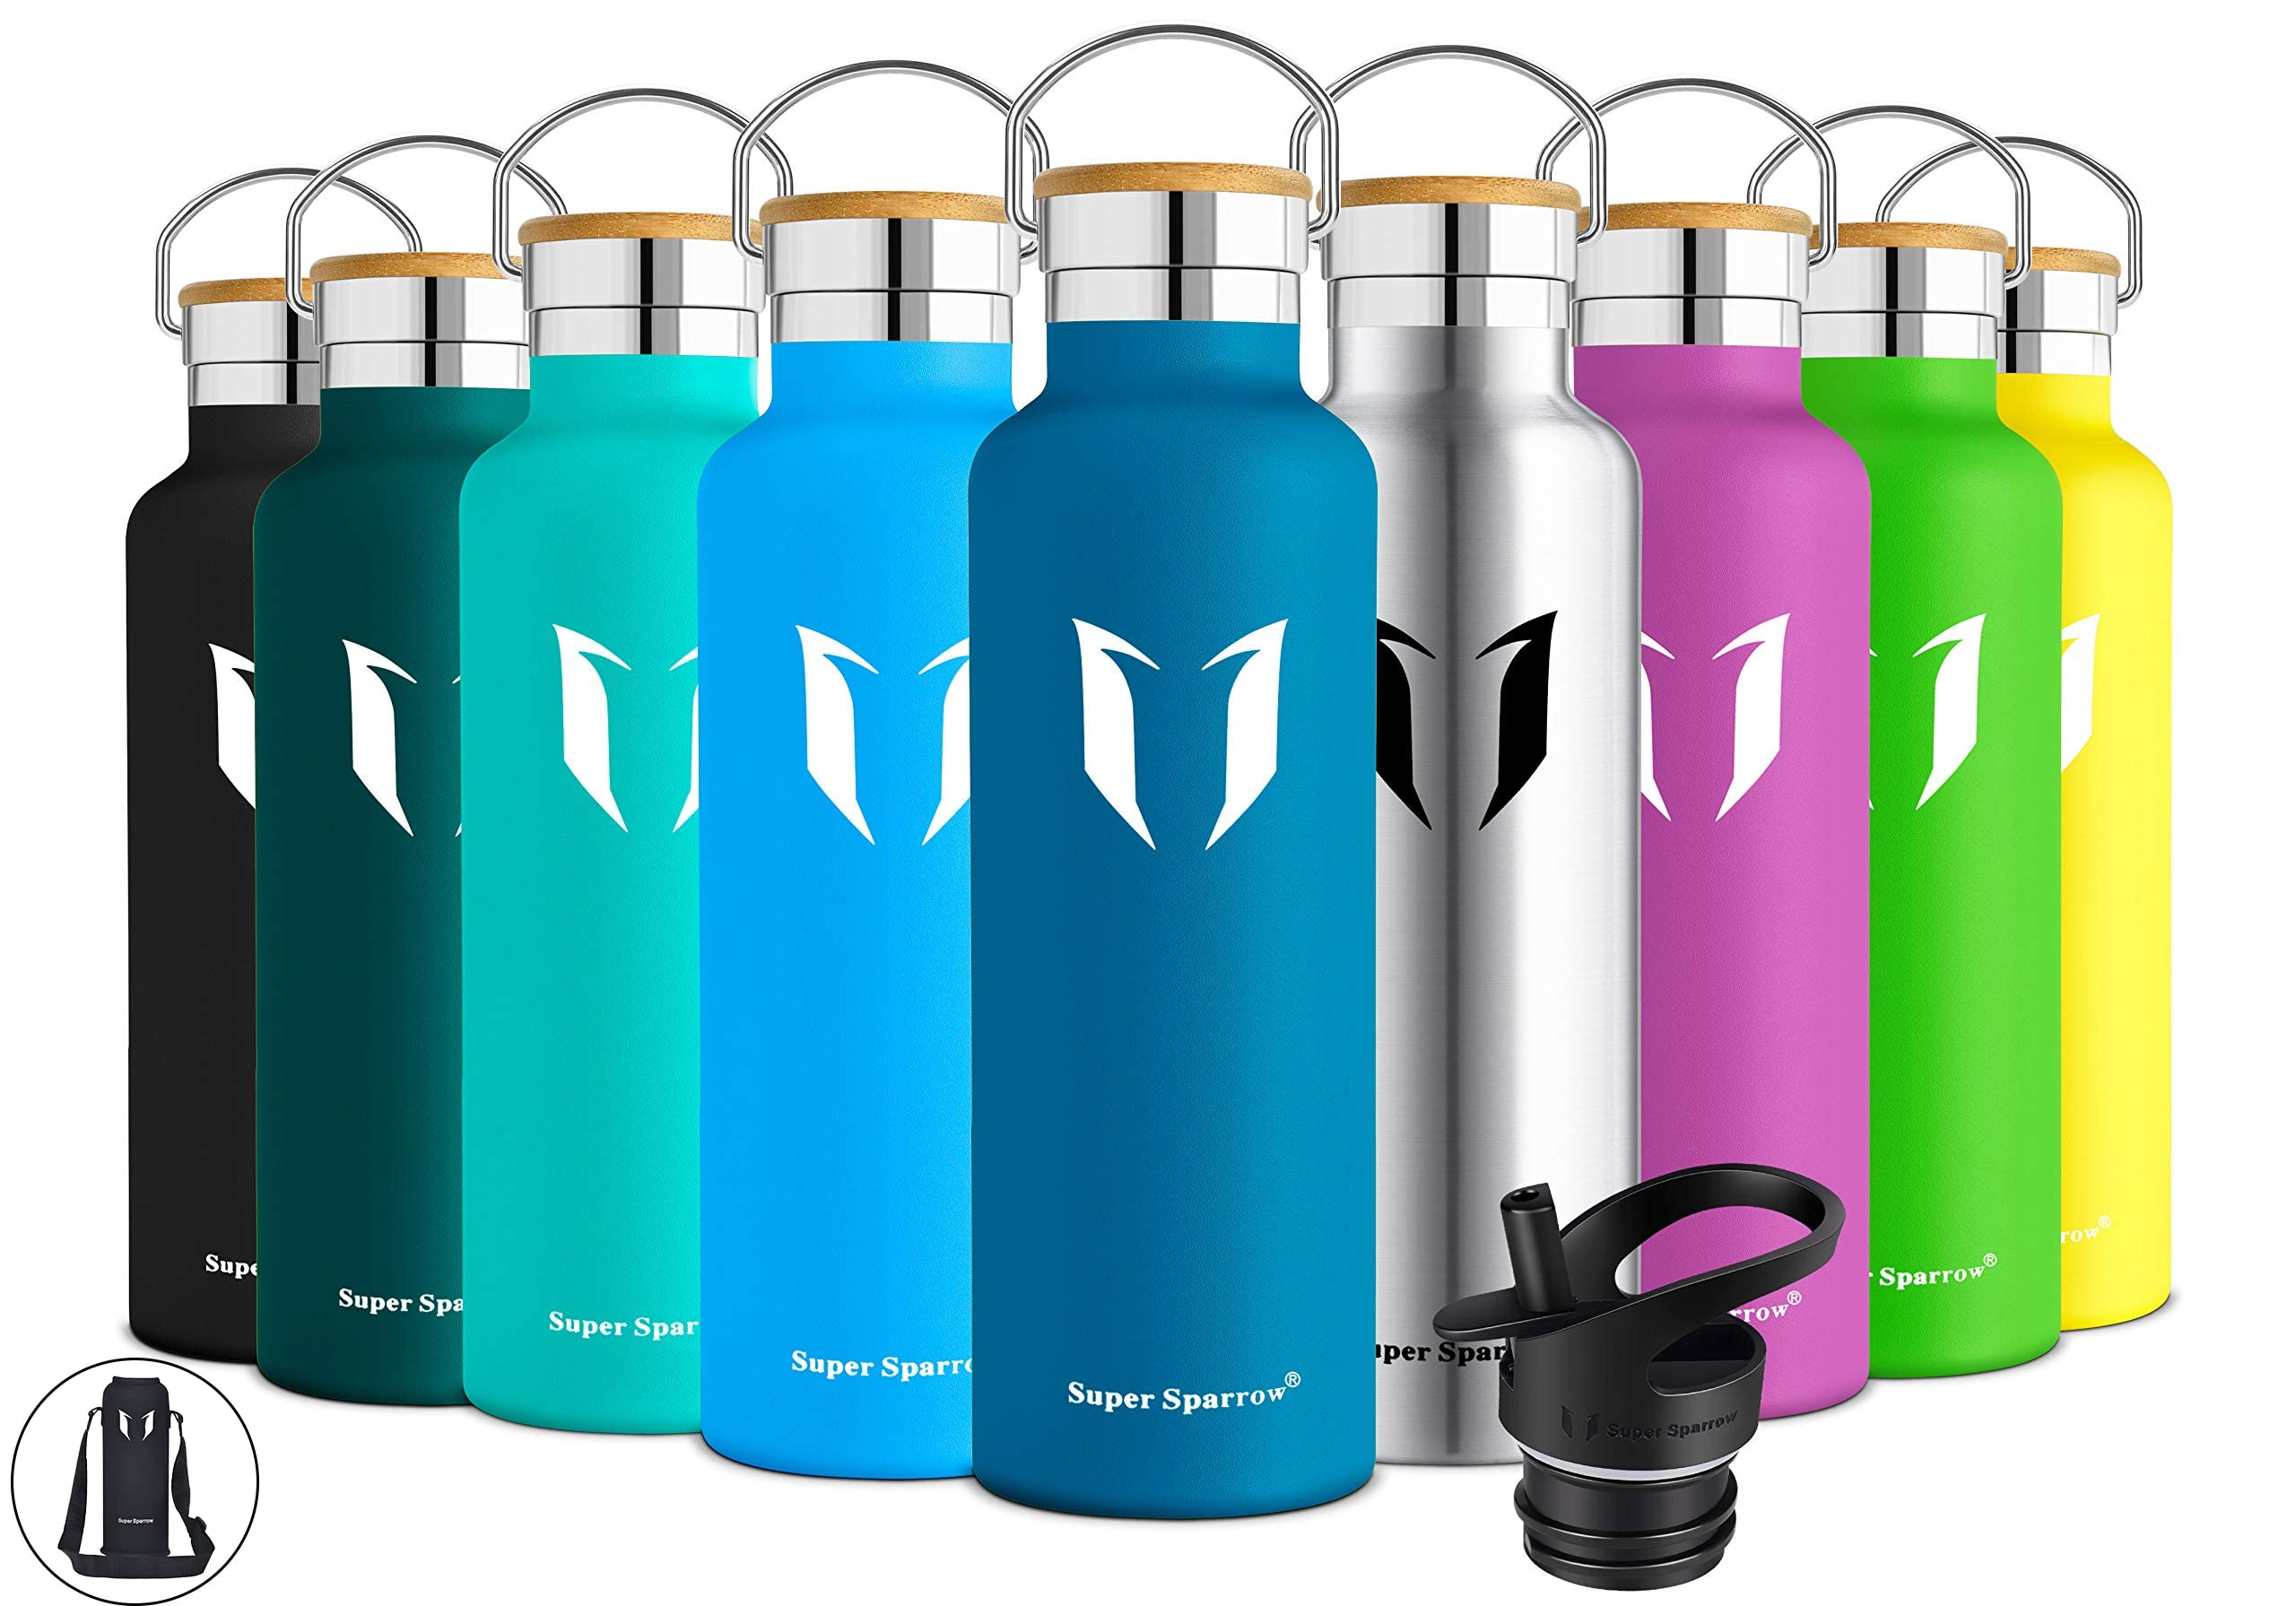  Super Sparrow Water Bottle Stainless Steel 18/10 - Ultralight  Metal Water Bottle - 750ml - Insulated Water Bottles - Water Bottle with  Straw Lid - Flask for Gym, Travel, Sports : Sports & Outdoors